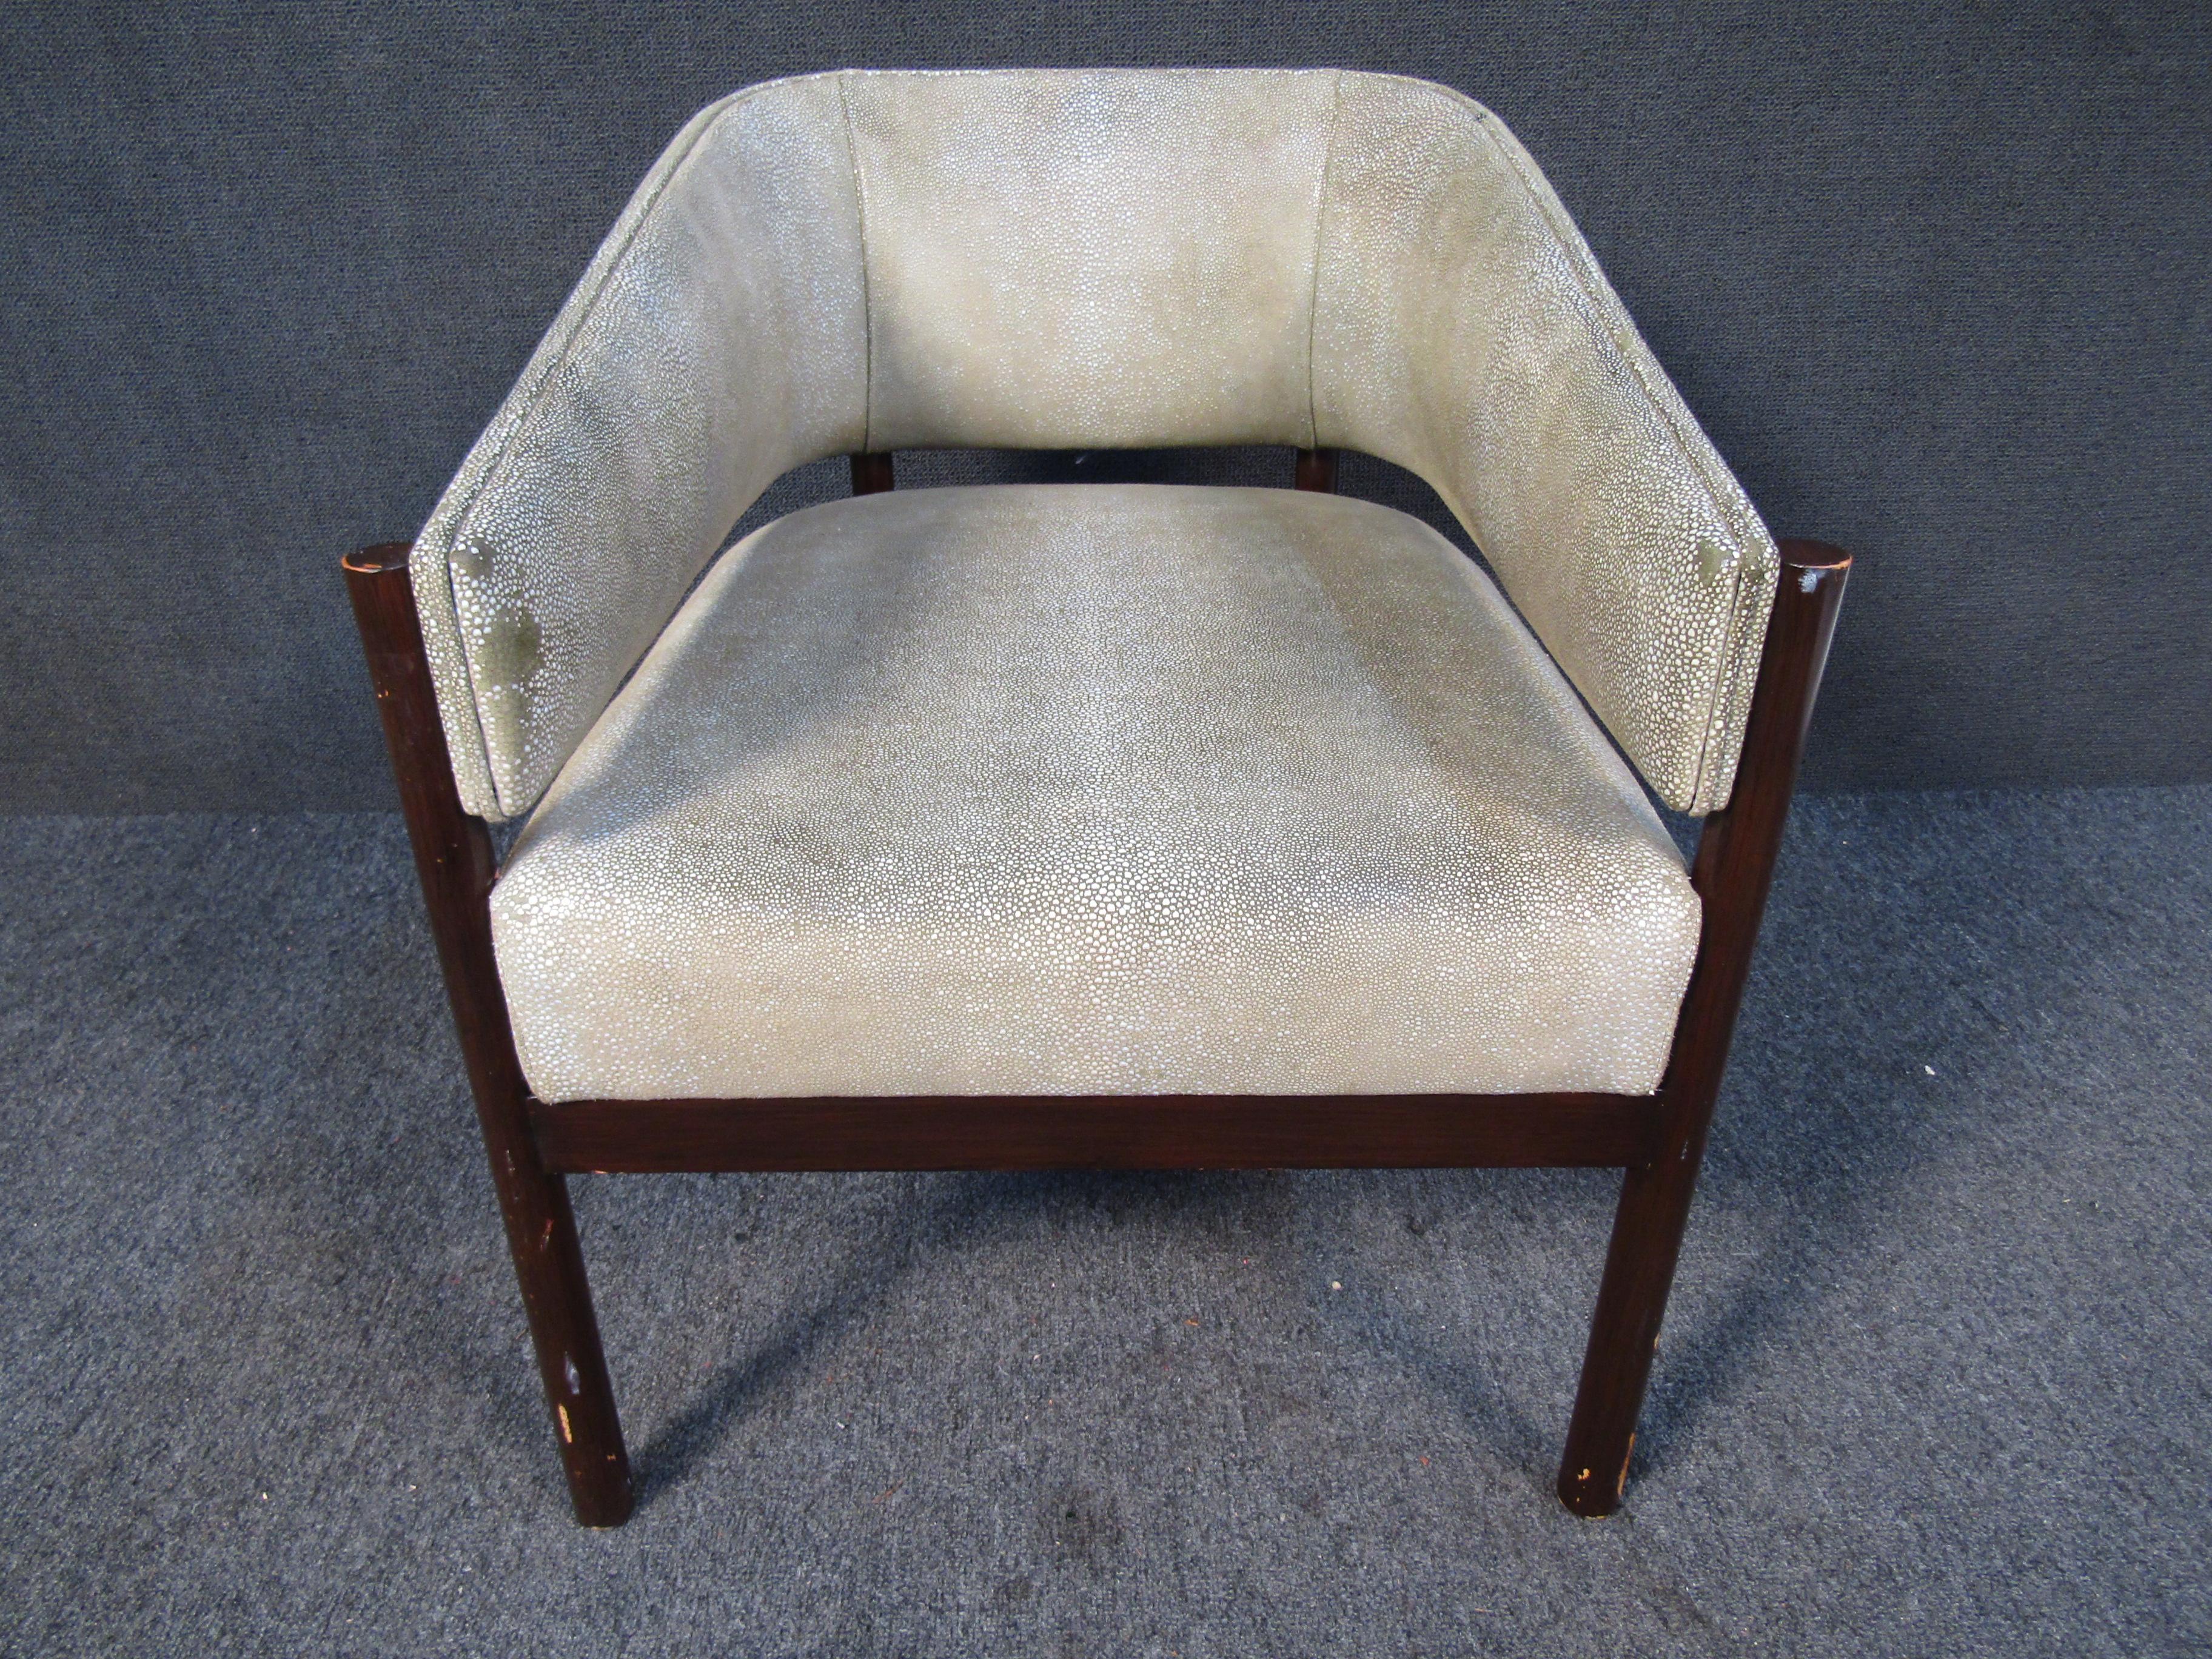 This vintage lounge chair is great for adding comfortable seating and Mid-Century Modern style to a space. Please confirm item location with seller (NY/NJ).